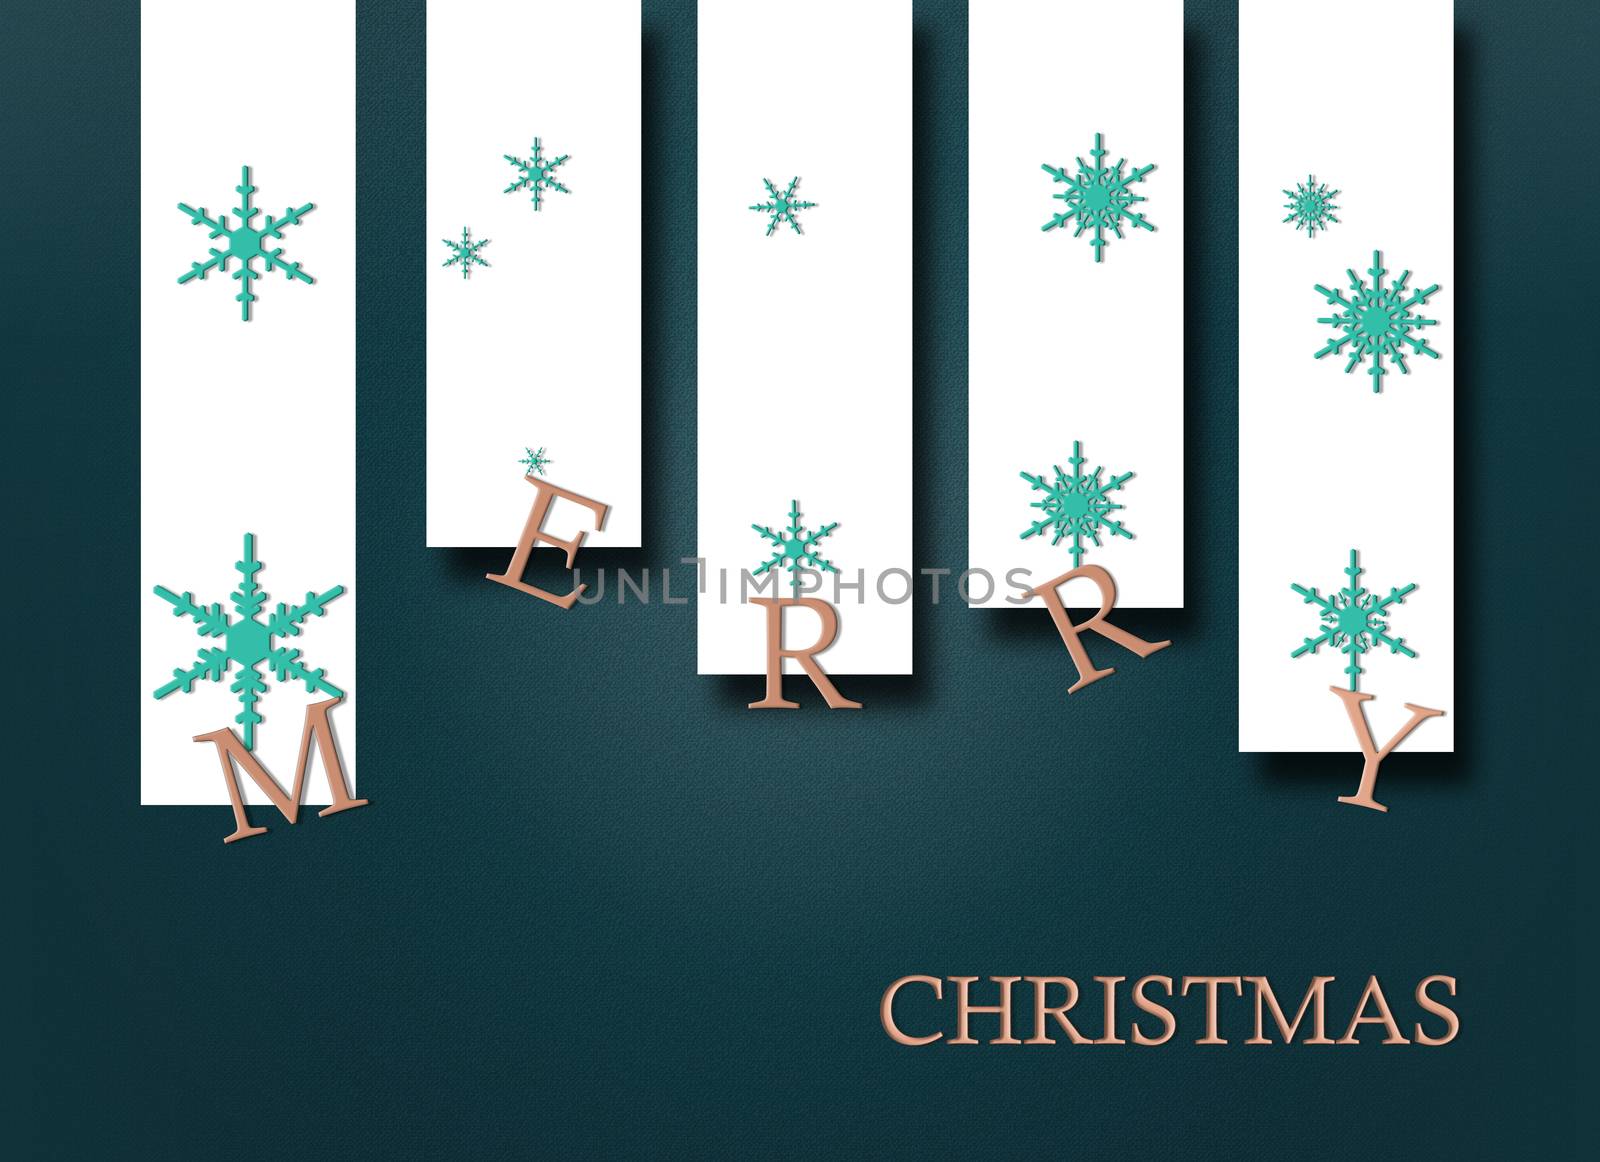 Merry Christmas text in antique gold and icons of snowflakes in turquoise blue on white and shiny green background. 3D illustration. Christmas, elegant 2021 New Year trendy greeting card, frame, banner, wallpaper.